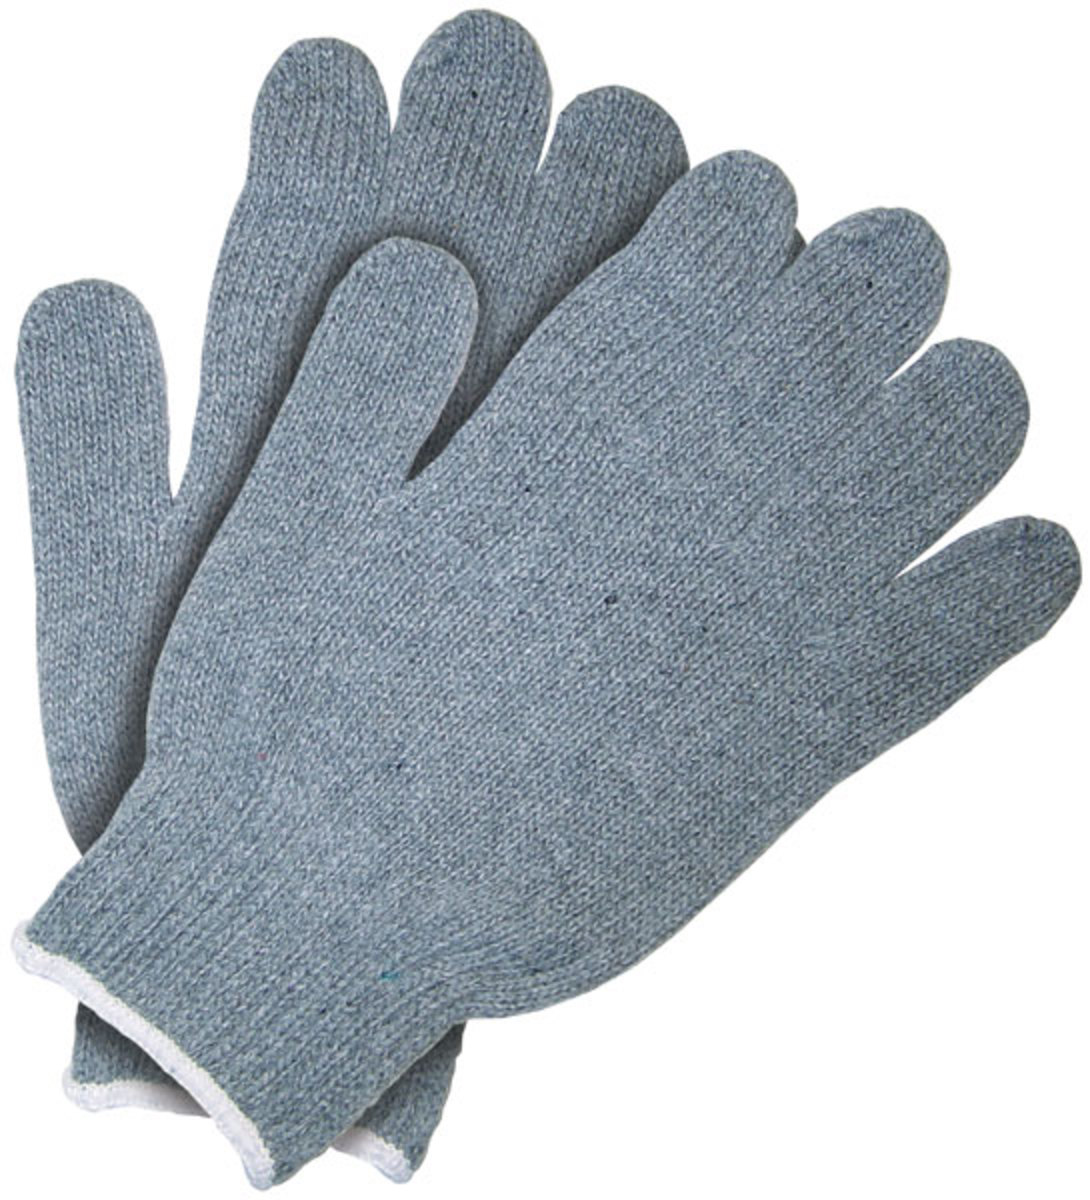 Memphis Glove Gray Large 7 Gauge Cotton And Polyester String Knit Work Gloves With Knit Wrist